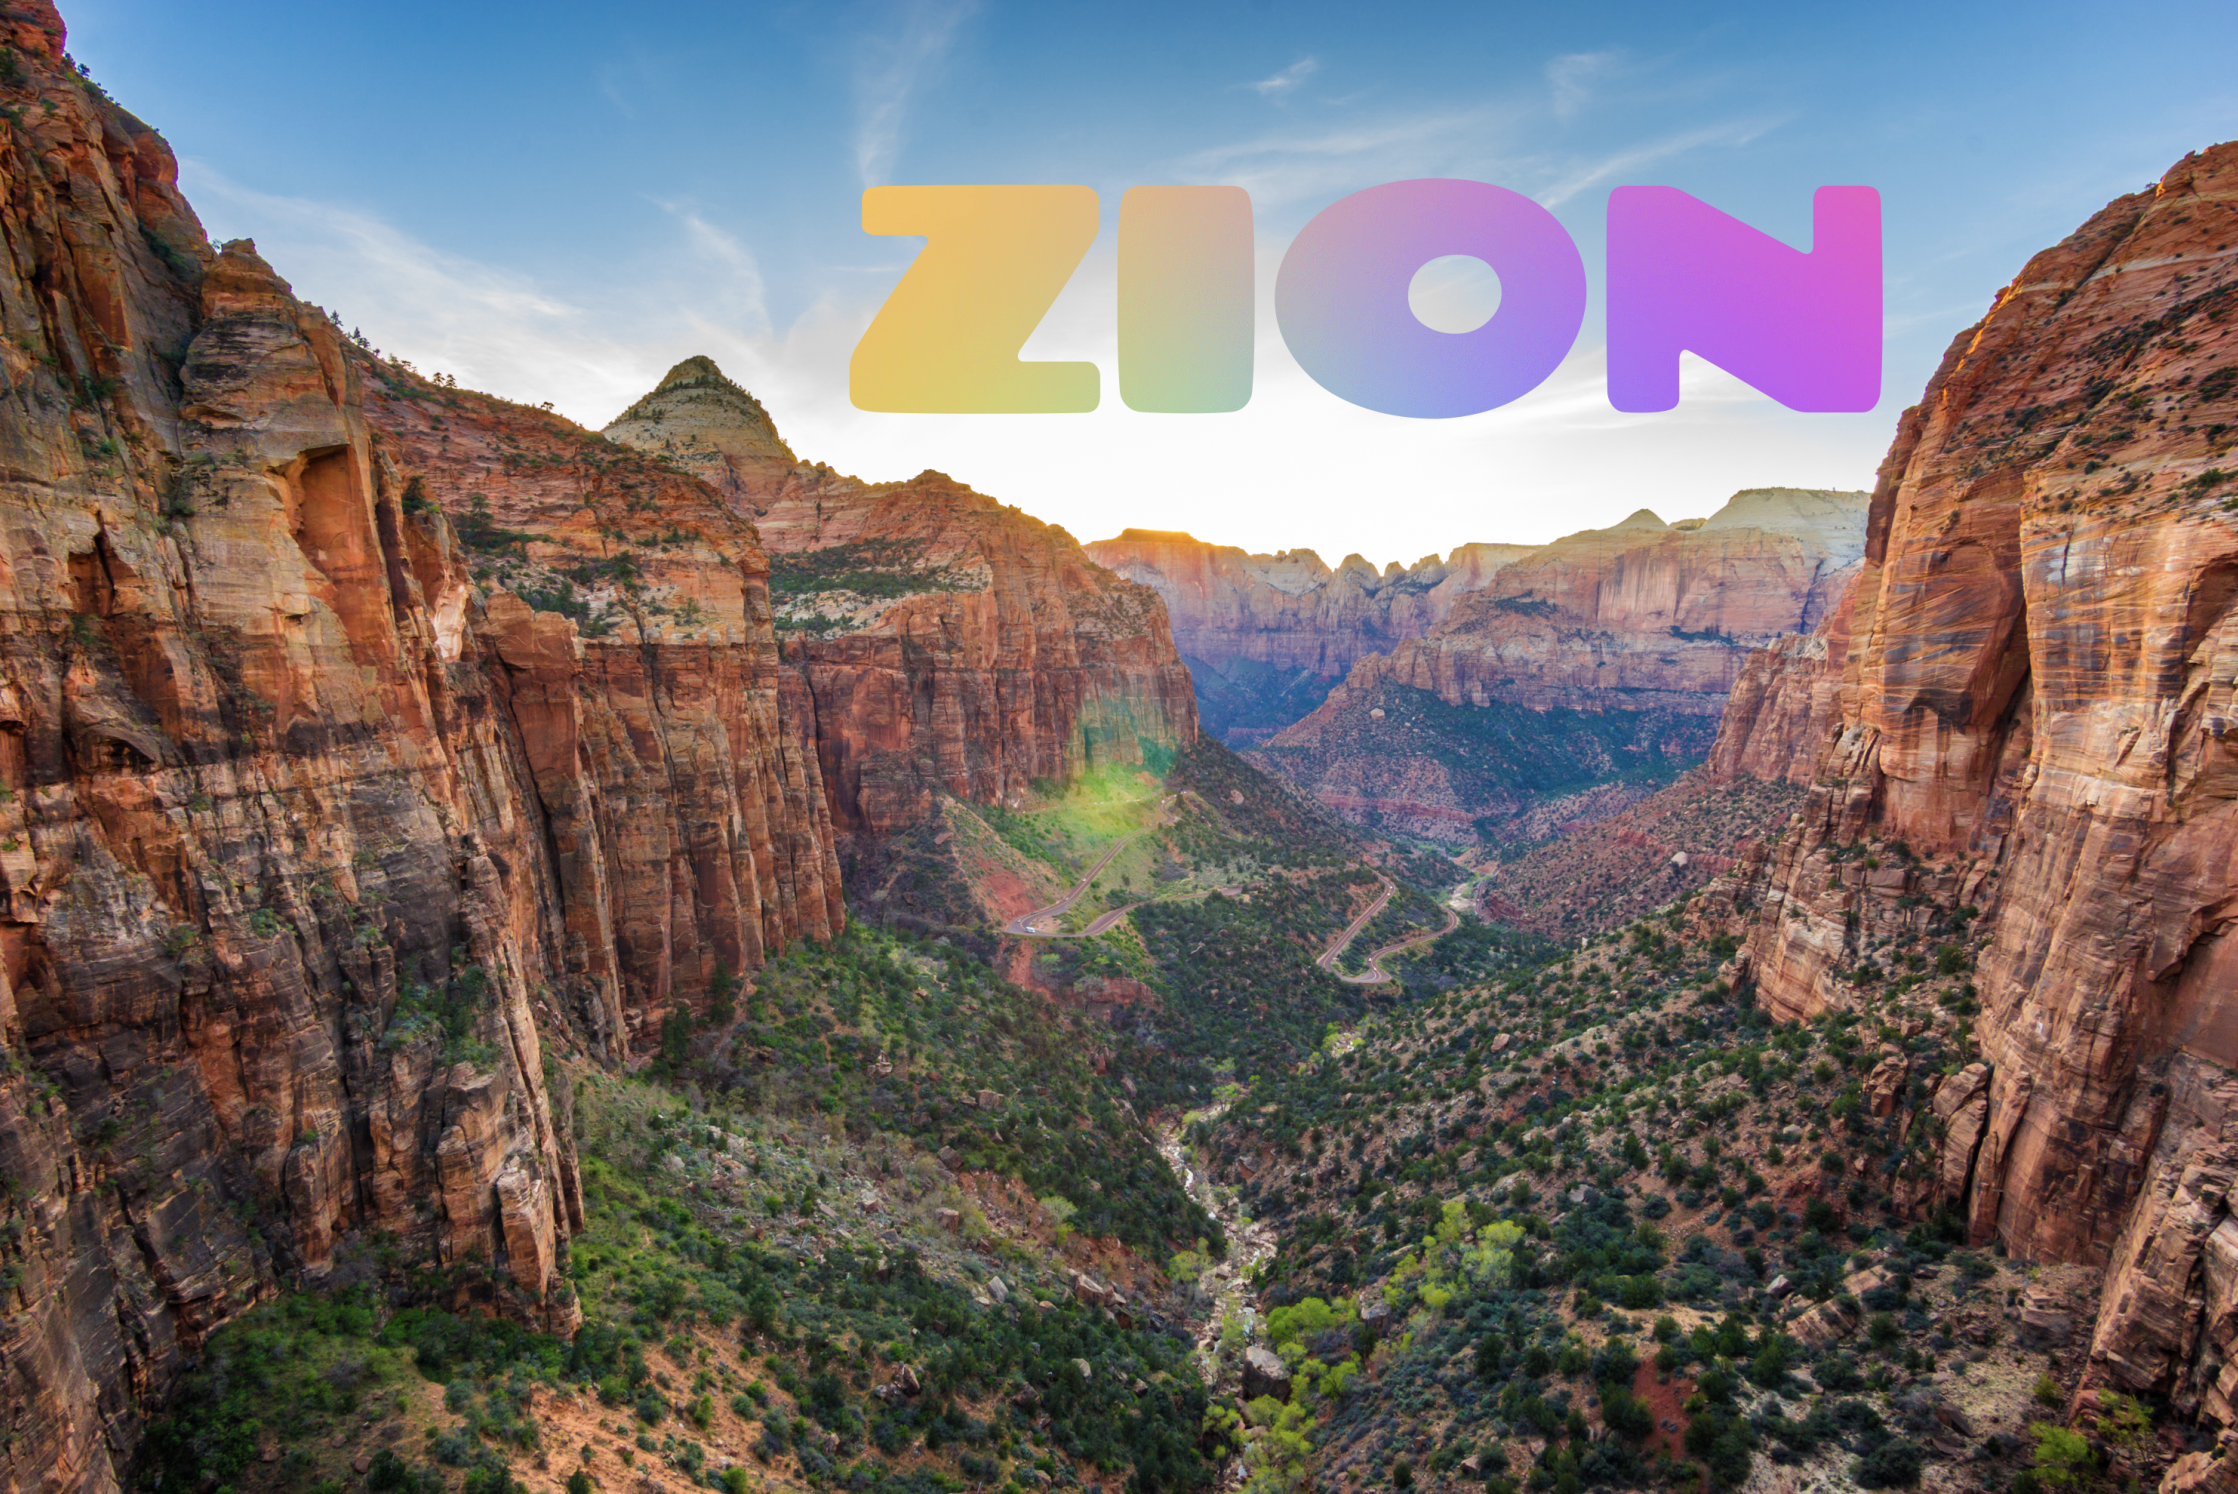 Zion National Park, Gem of the American Southwest